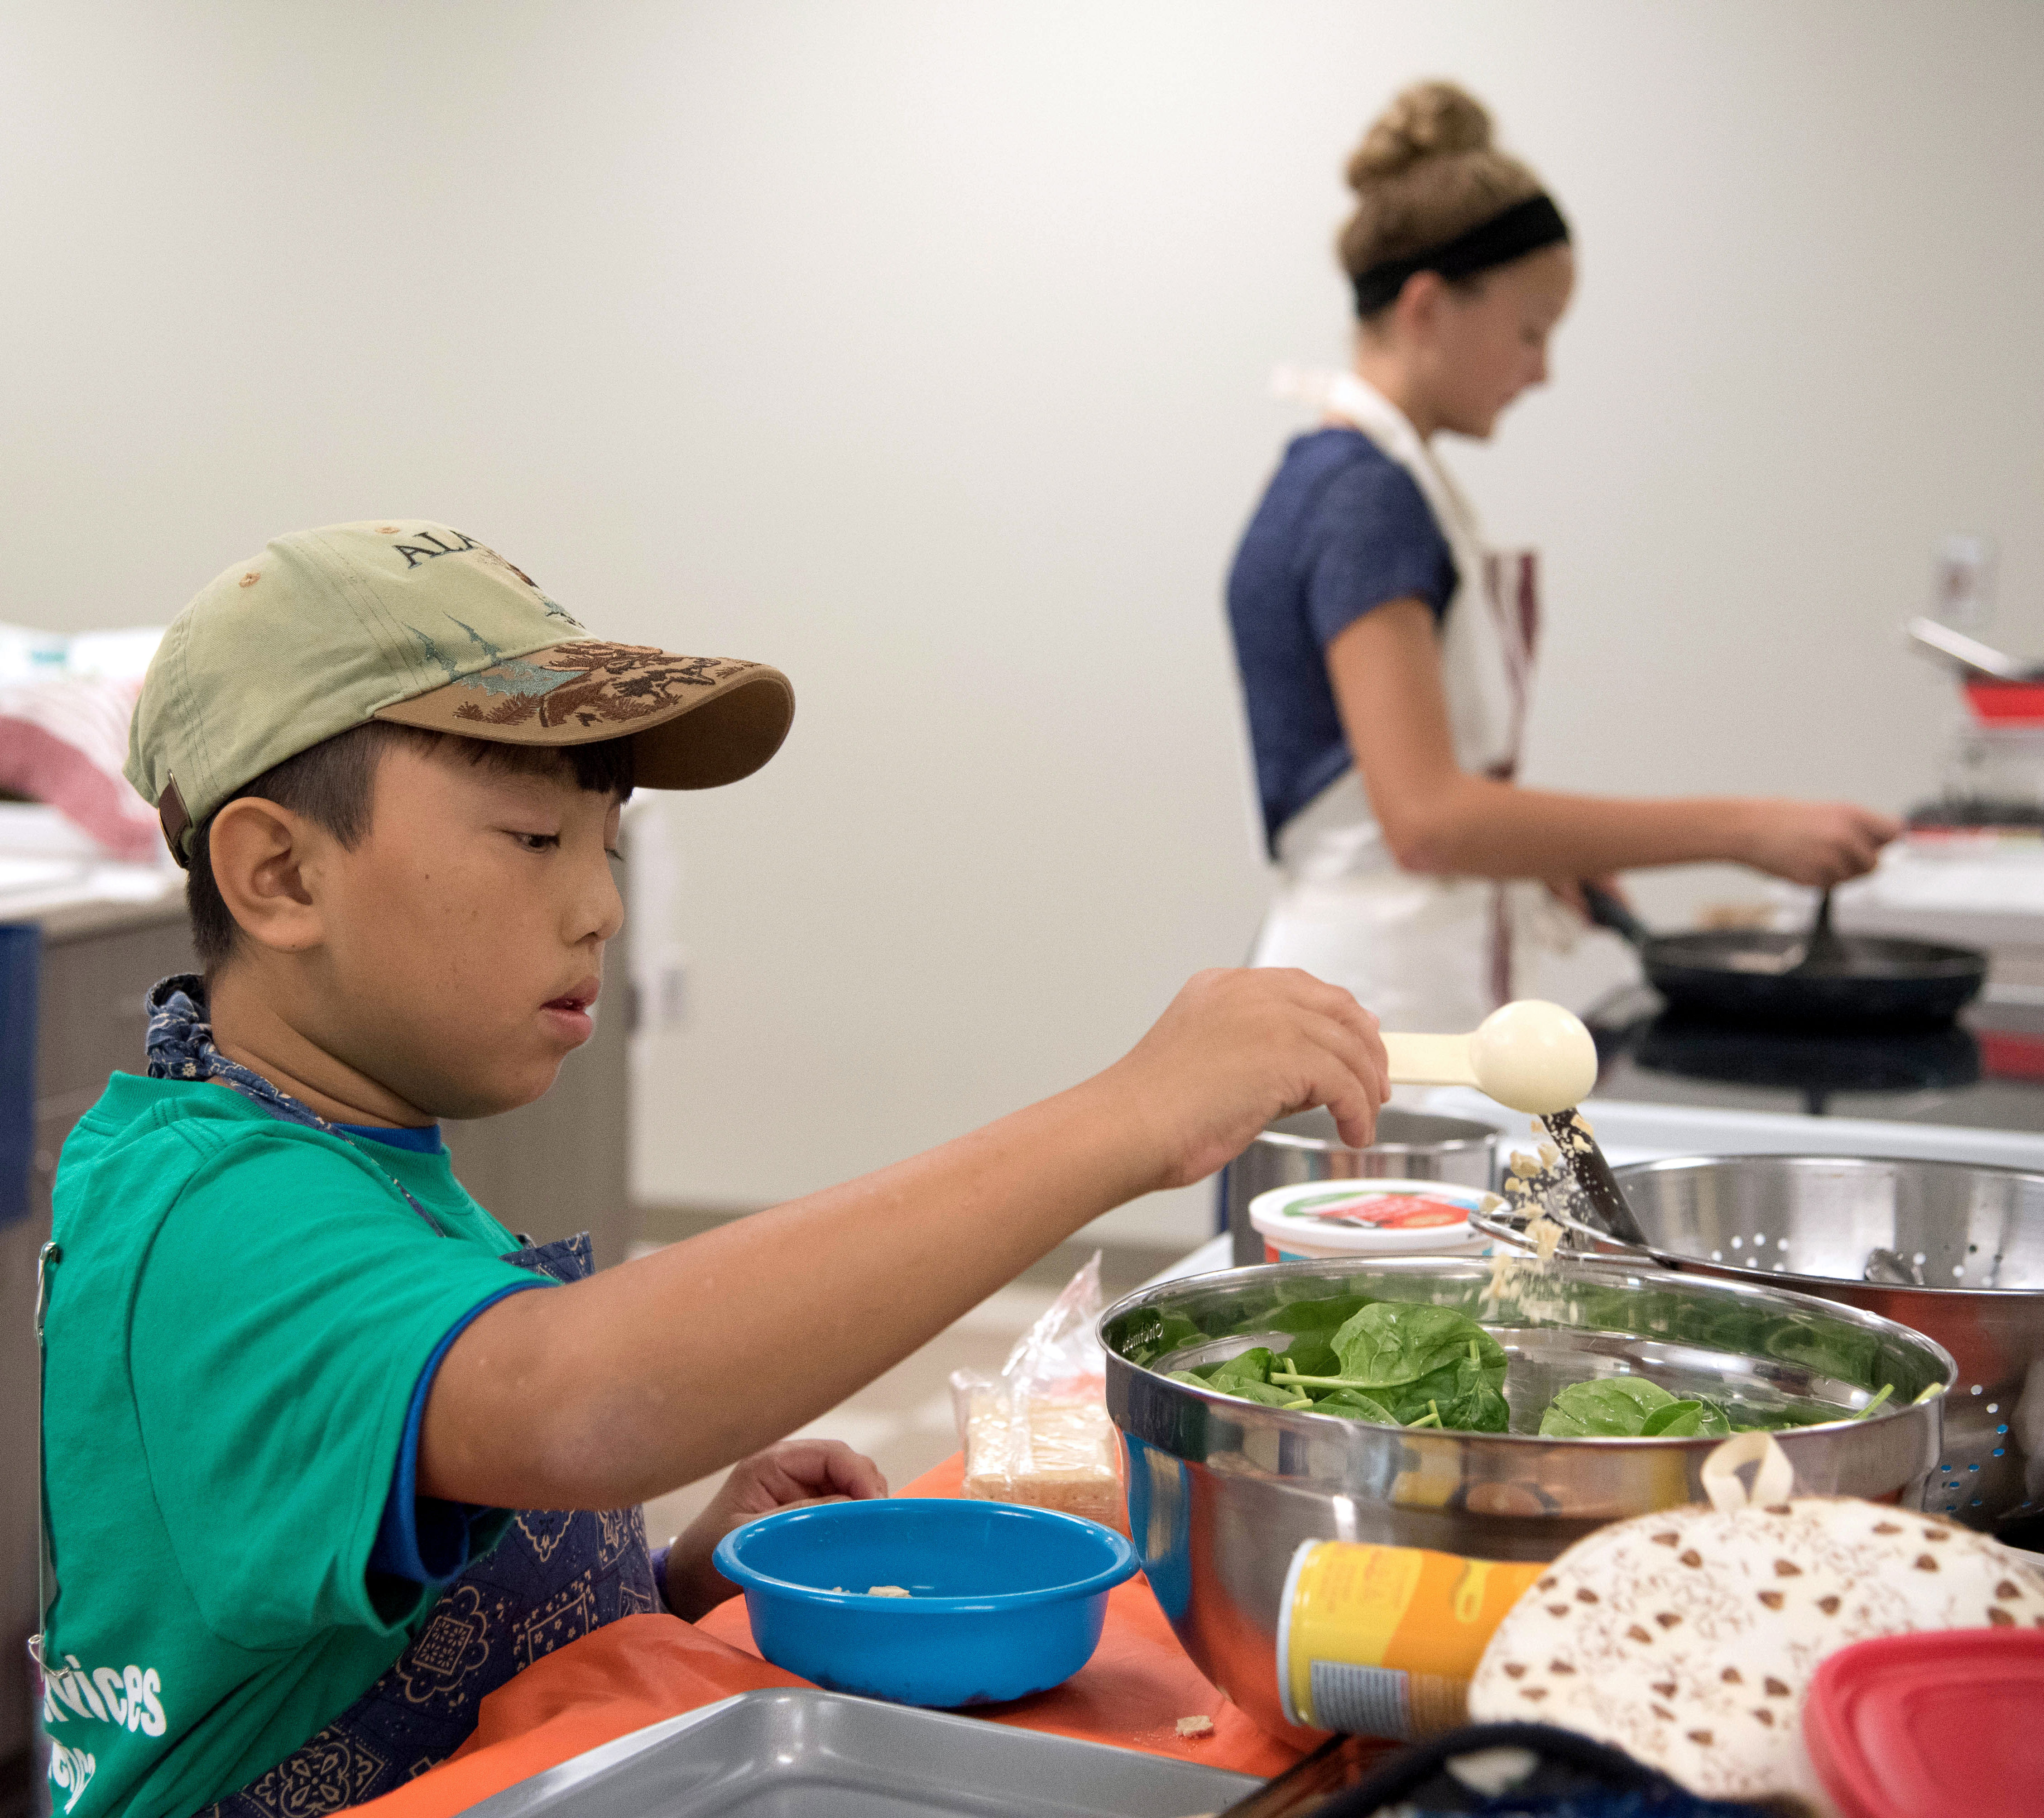 male 4-H youth preparing a salad in a silver mixing bowl